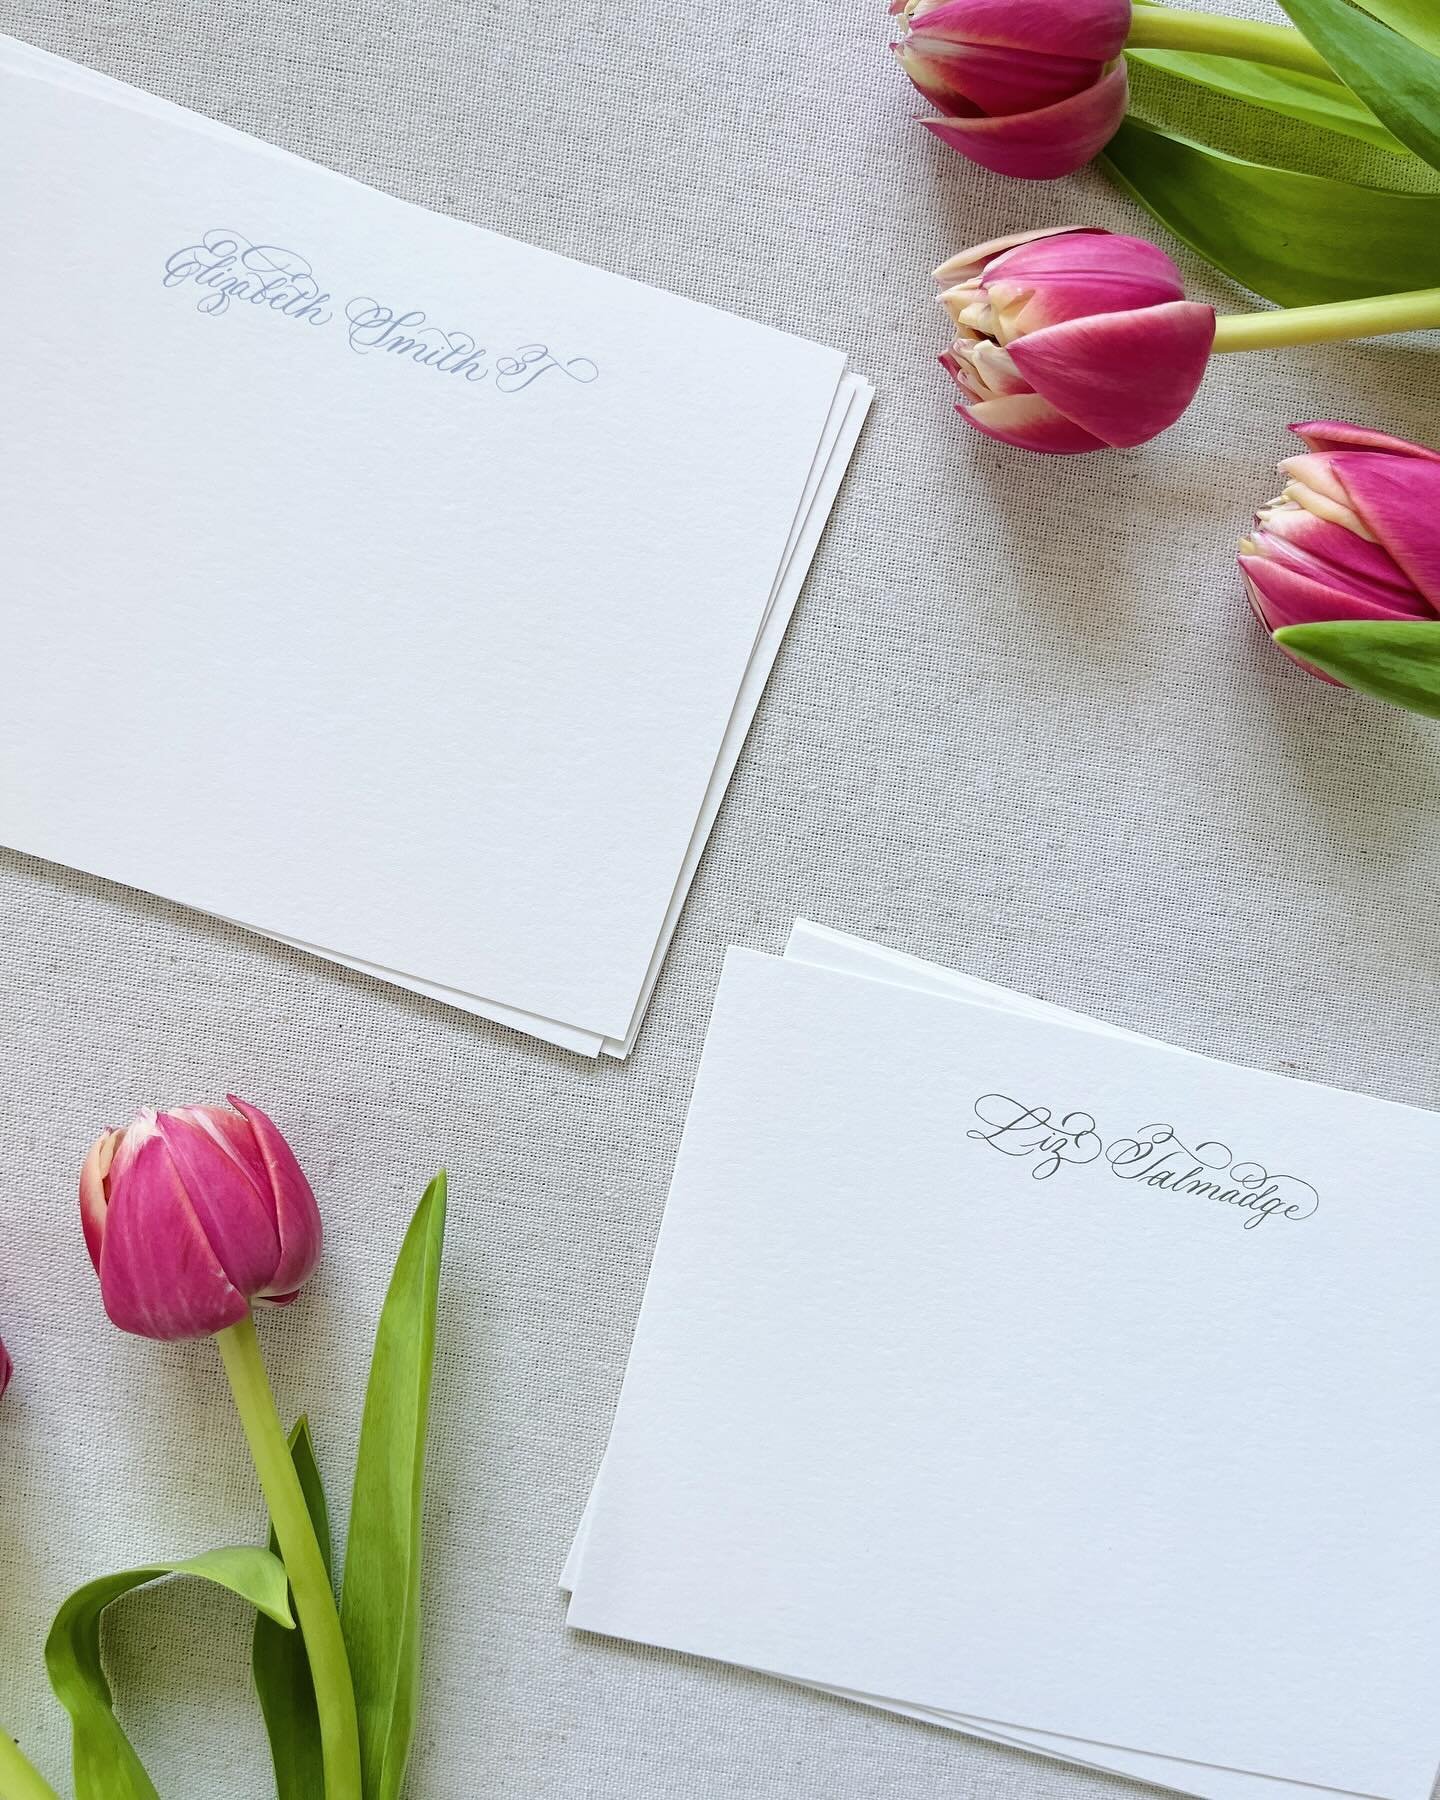 The perfect Mother&rsquo;s Day gifts are here! Custom calligraphy stationery, notepads &amp; gift tags 🌷🤍

#mothersday #mothersdaygift #stationery #trending #personalstationery #giftguide